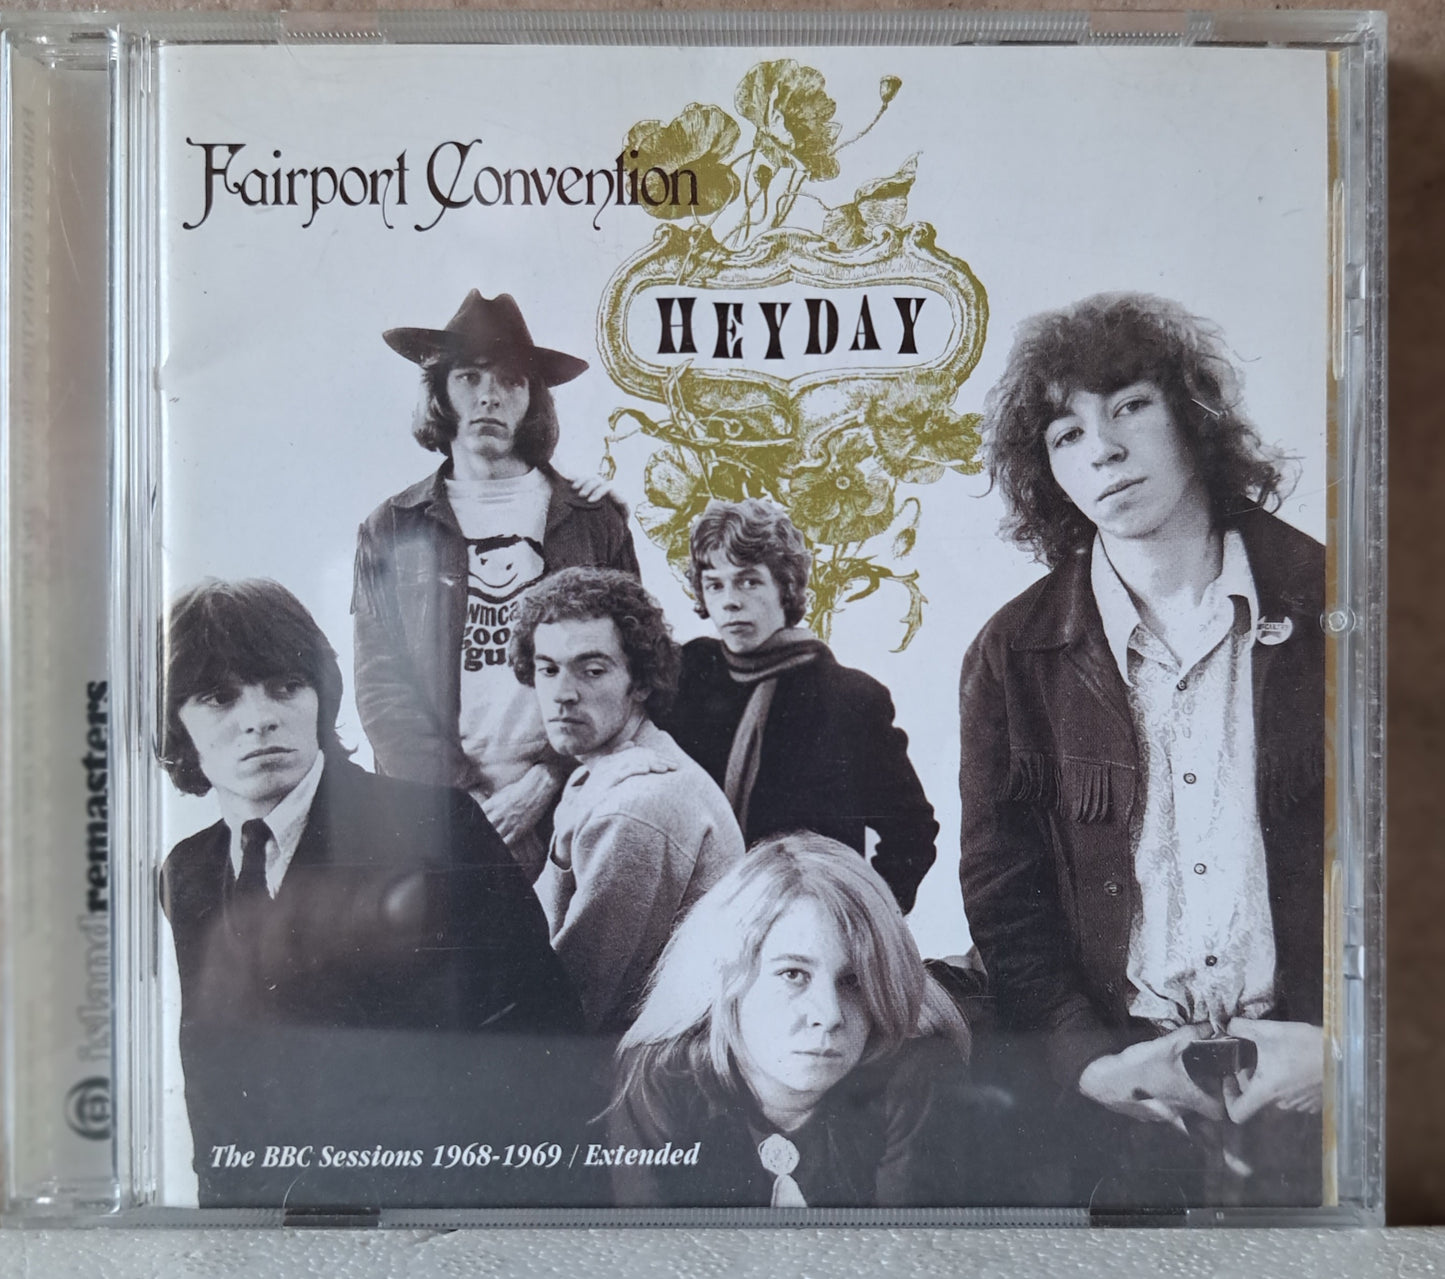 Fairport Convention - Heyday (cd)